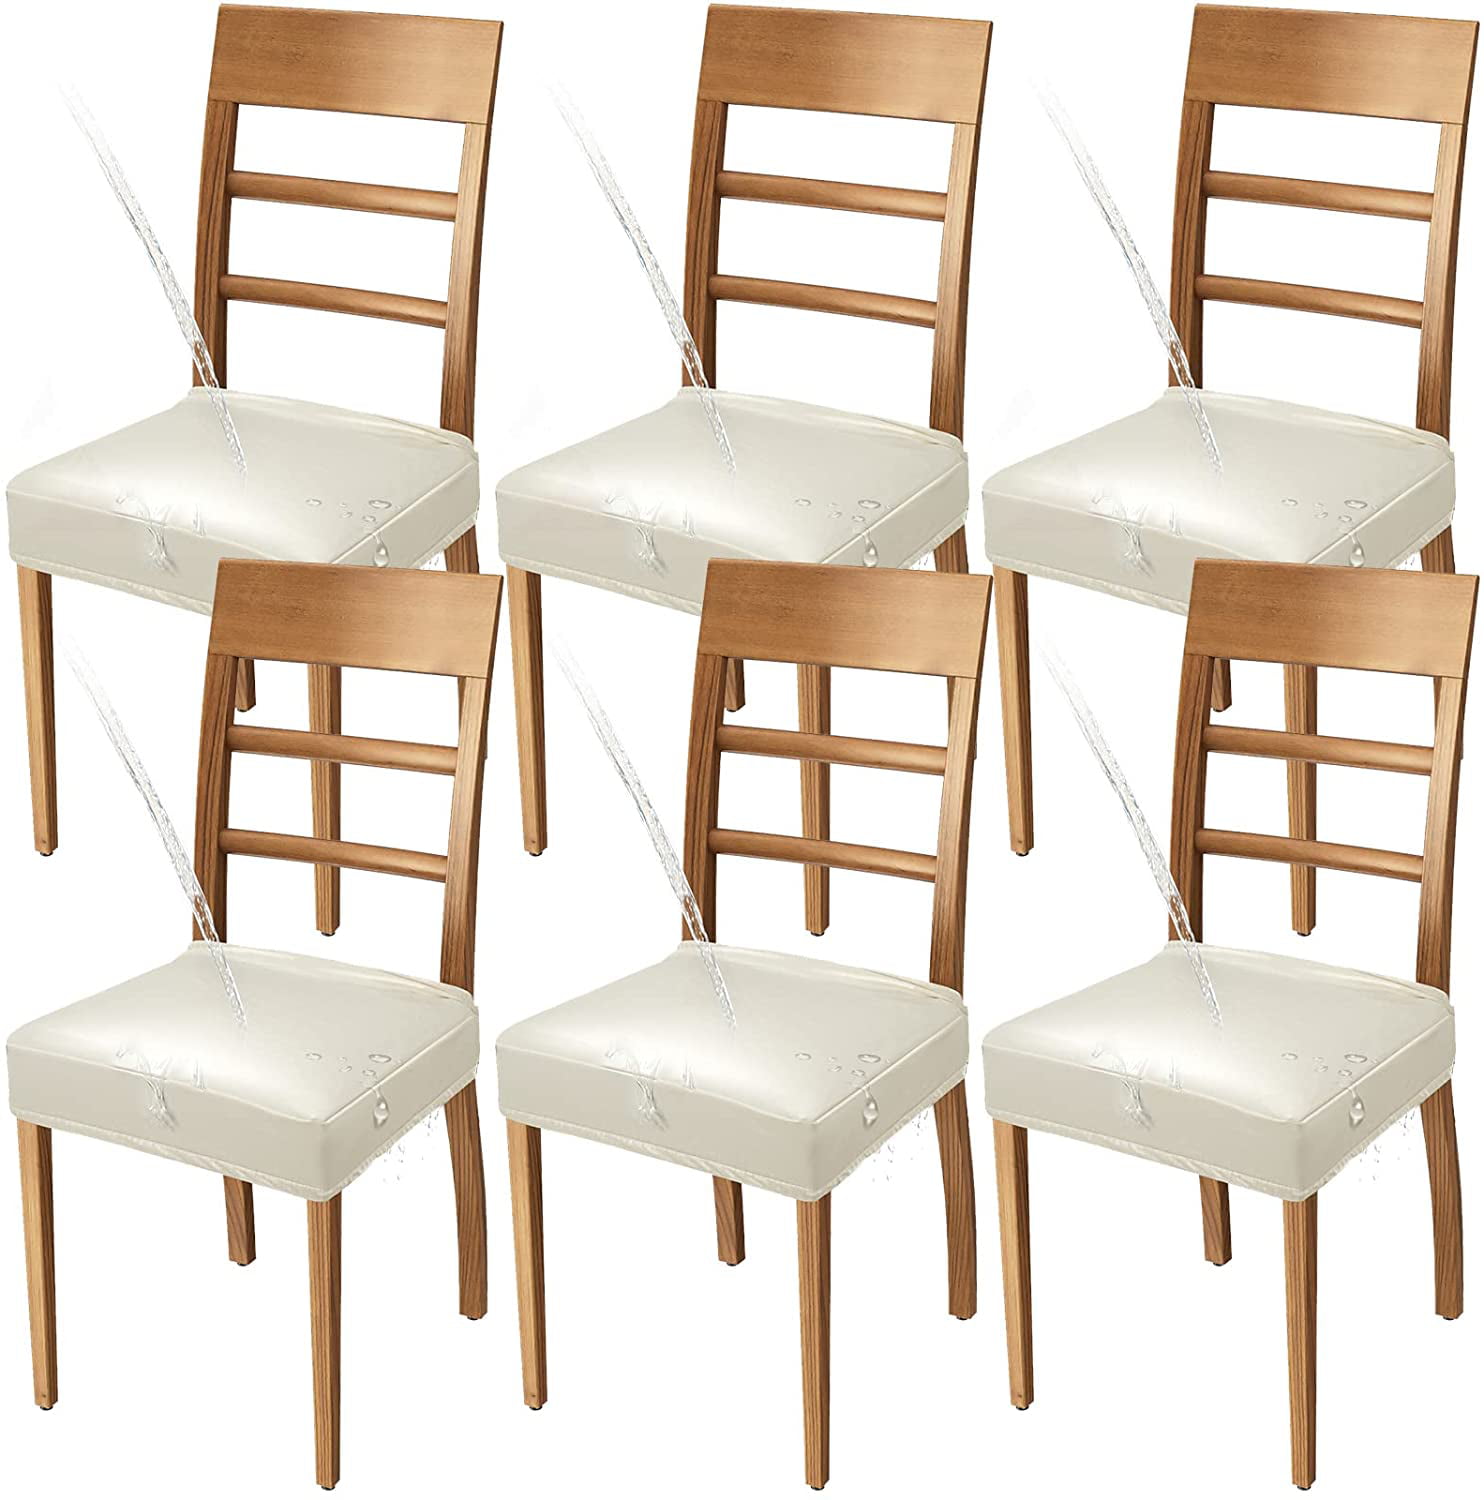 Details about   US Stretch Dining Chair Seat Covers Removable Seat Cushion Slipcover Protector 